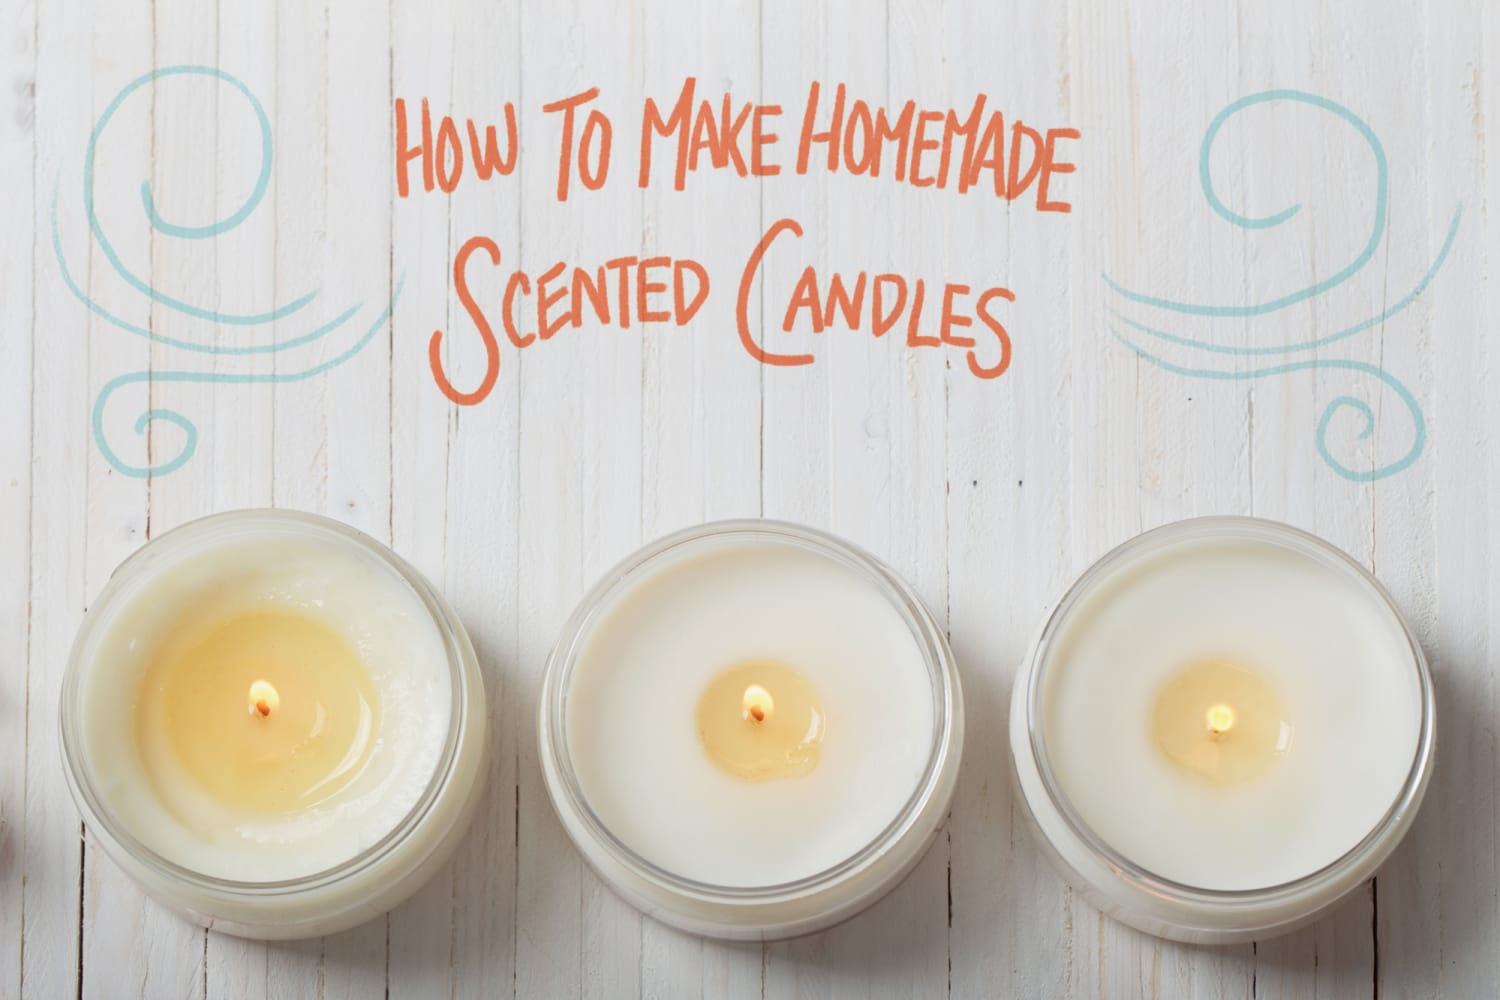 How to make scented candles at home with our step-by-step guide